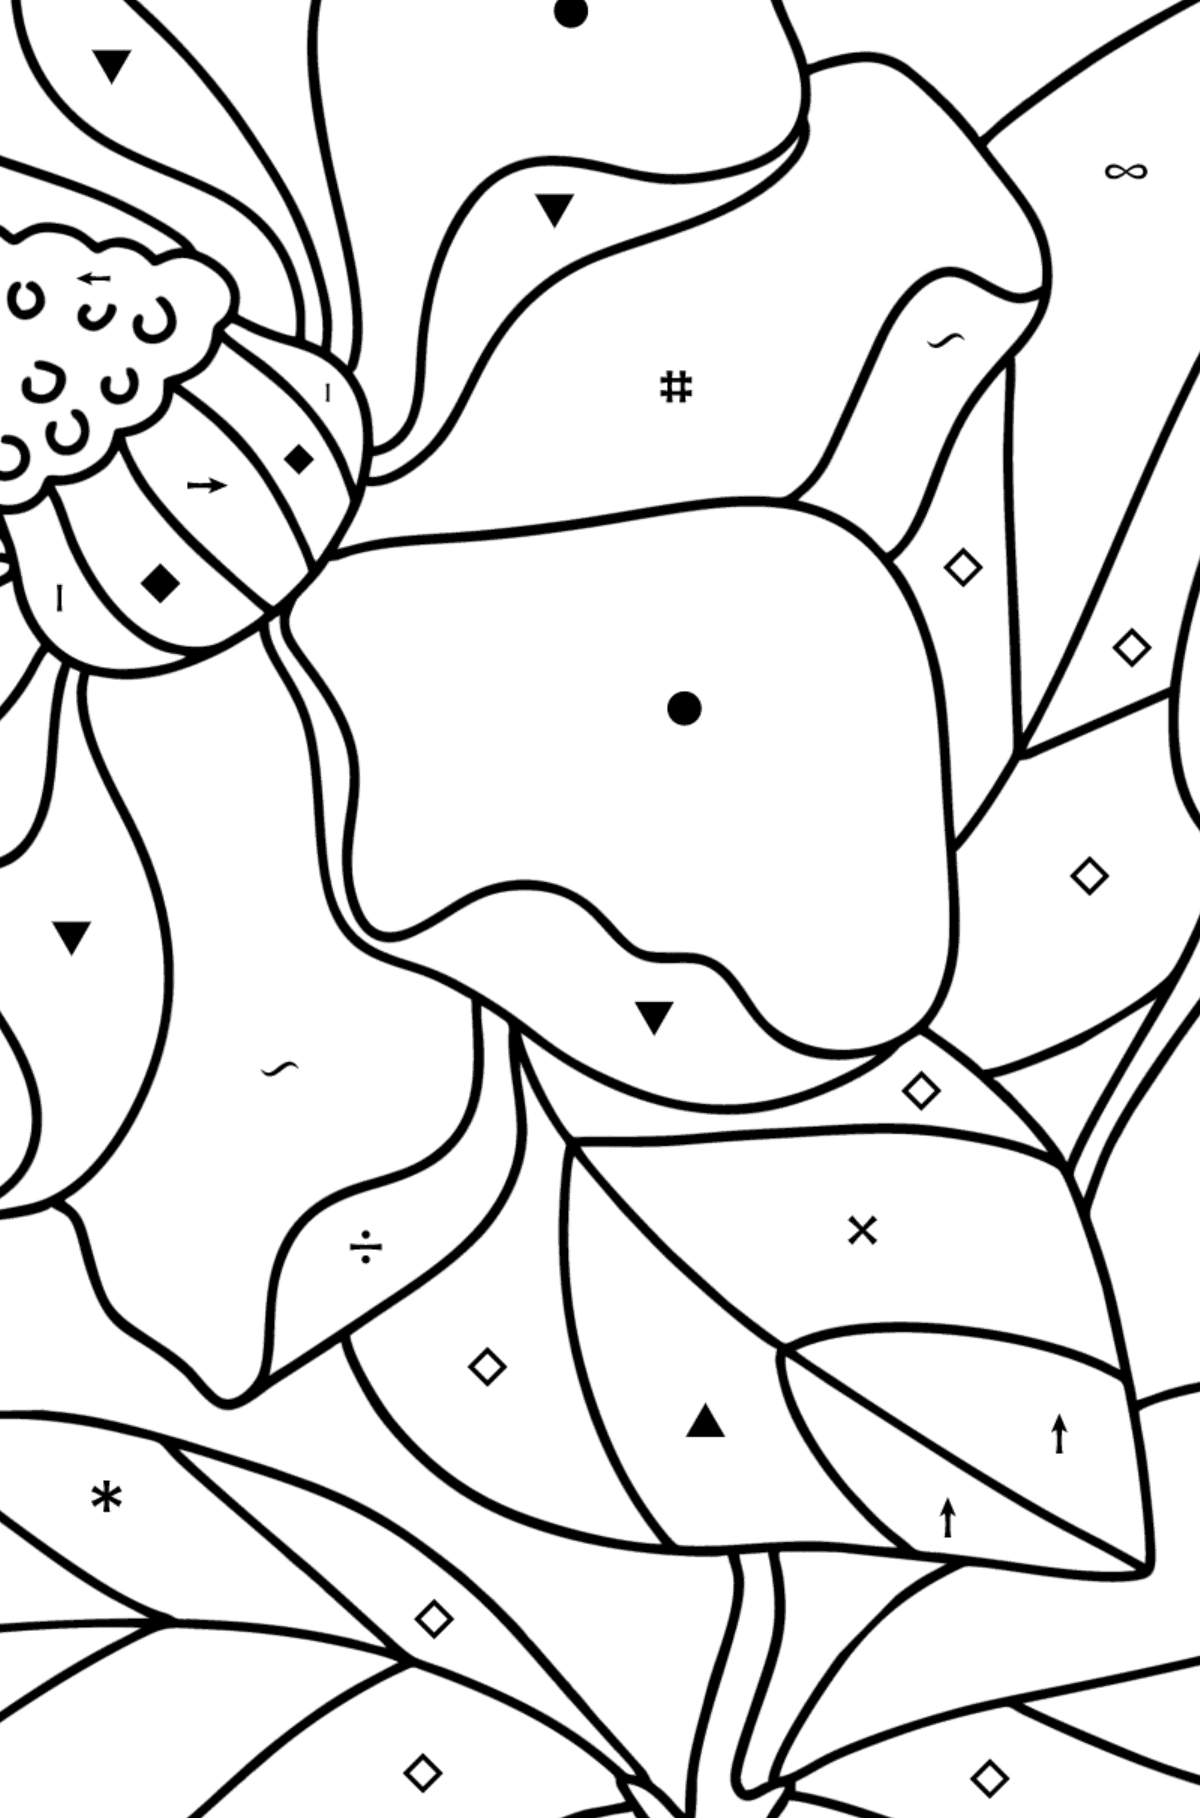 Magnolia coloring page - Coloring by Symbols for Kids